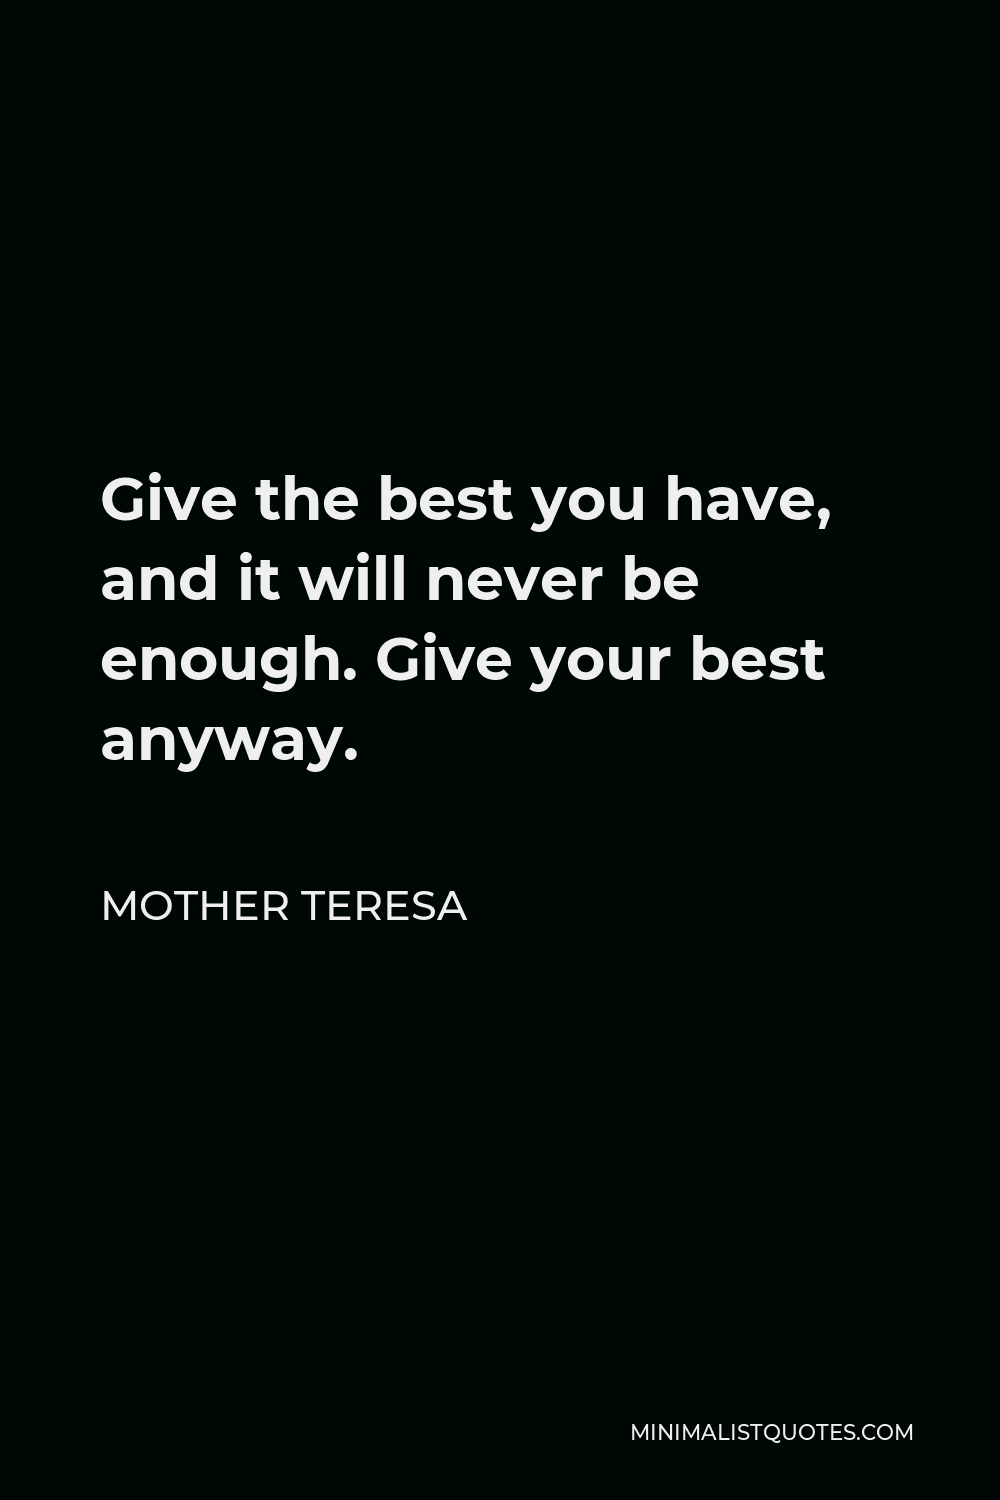 Mother Teresa Quote - Give the best you have, and it will never be enough. Give your best anyway.